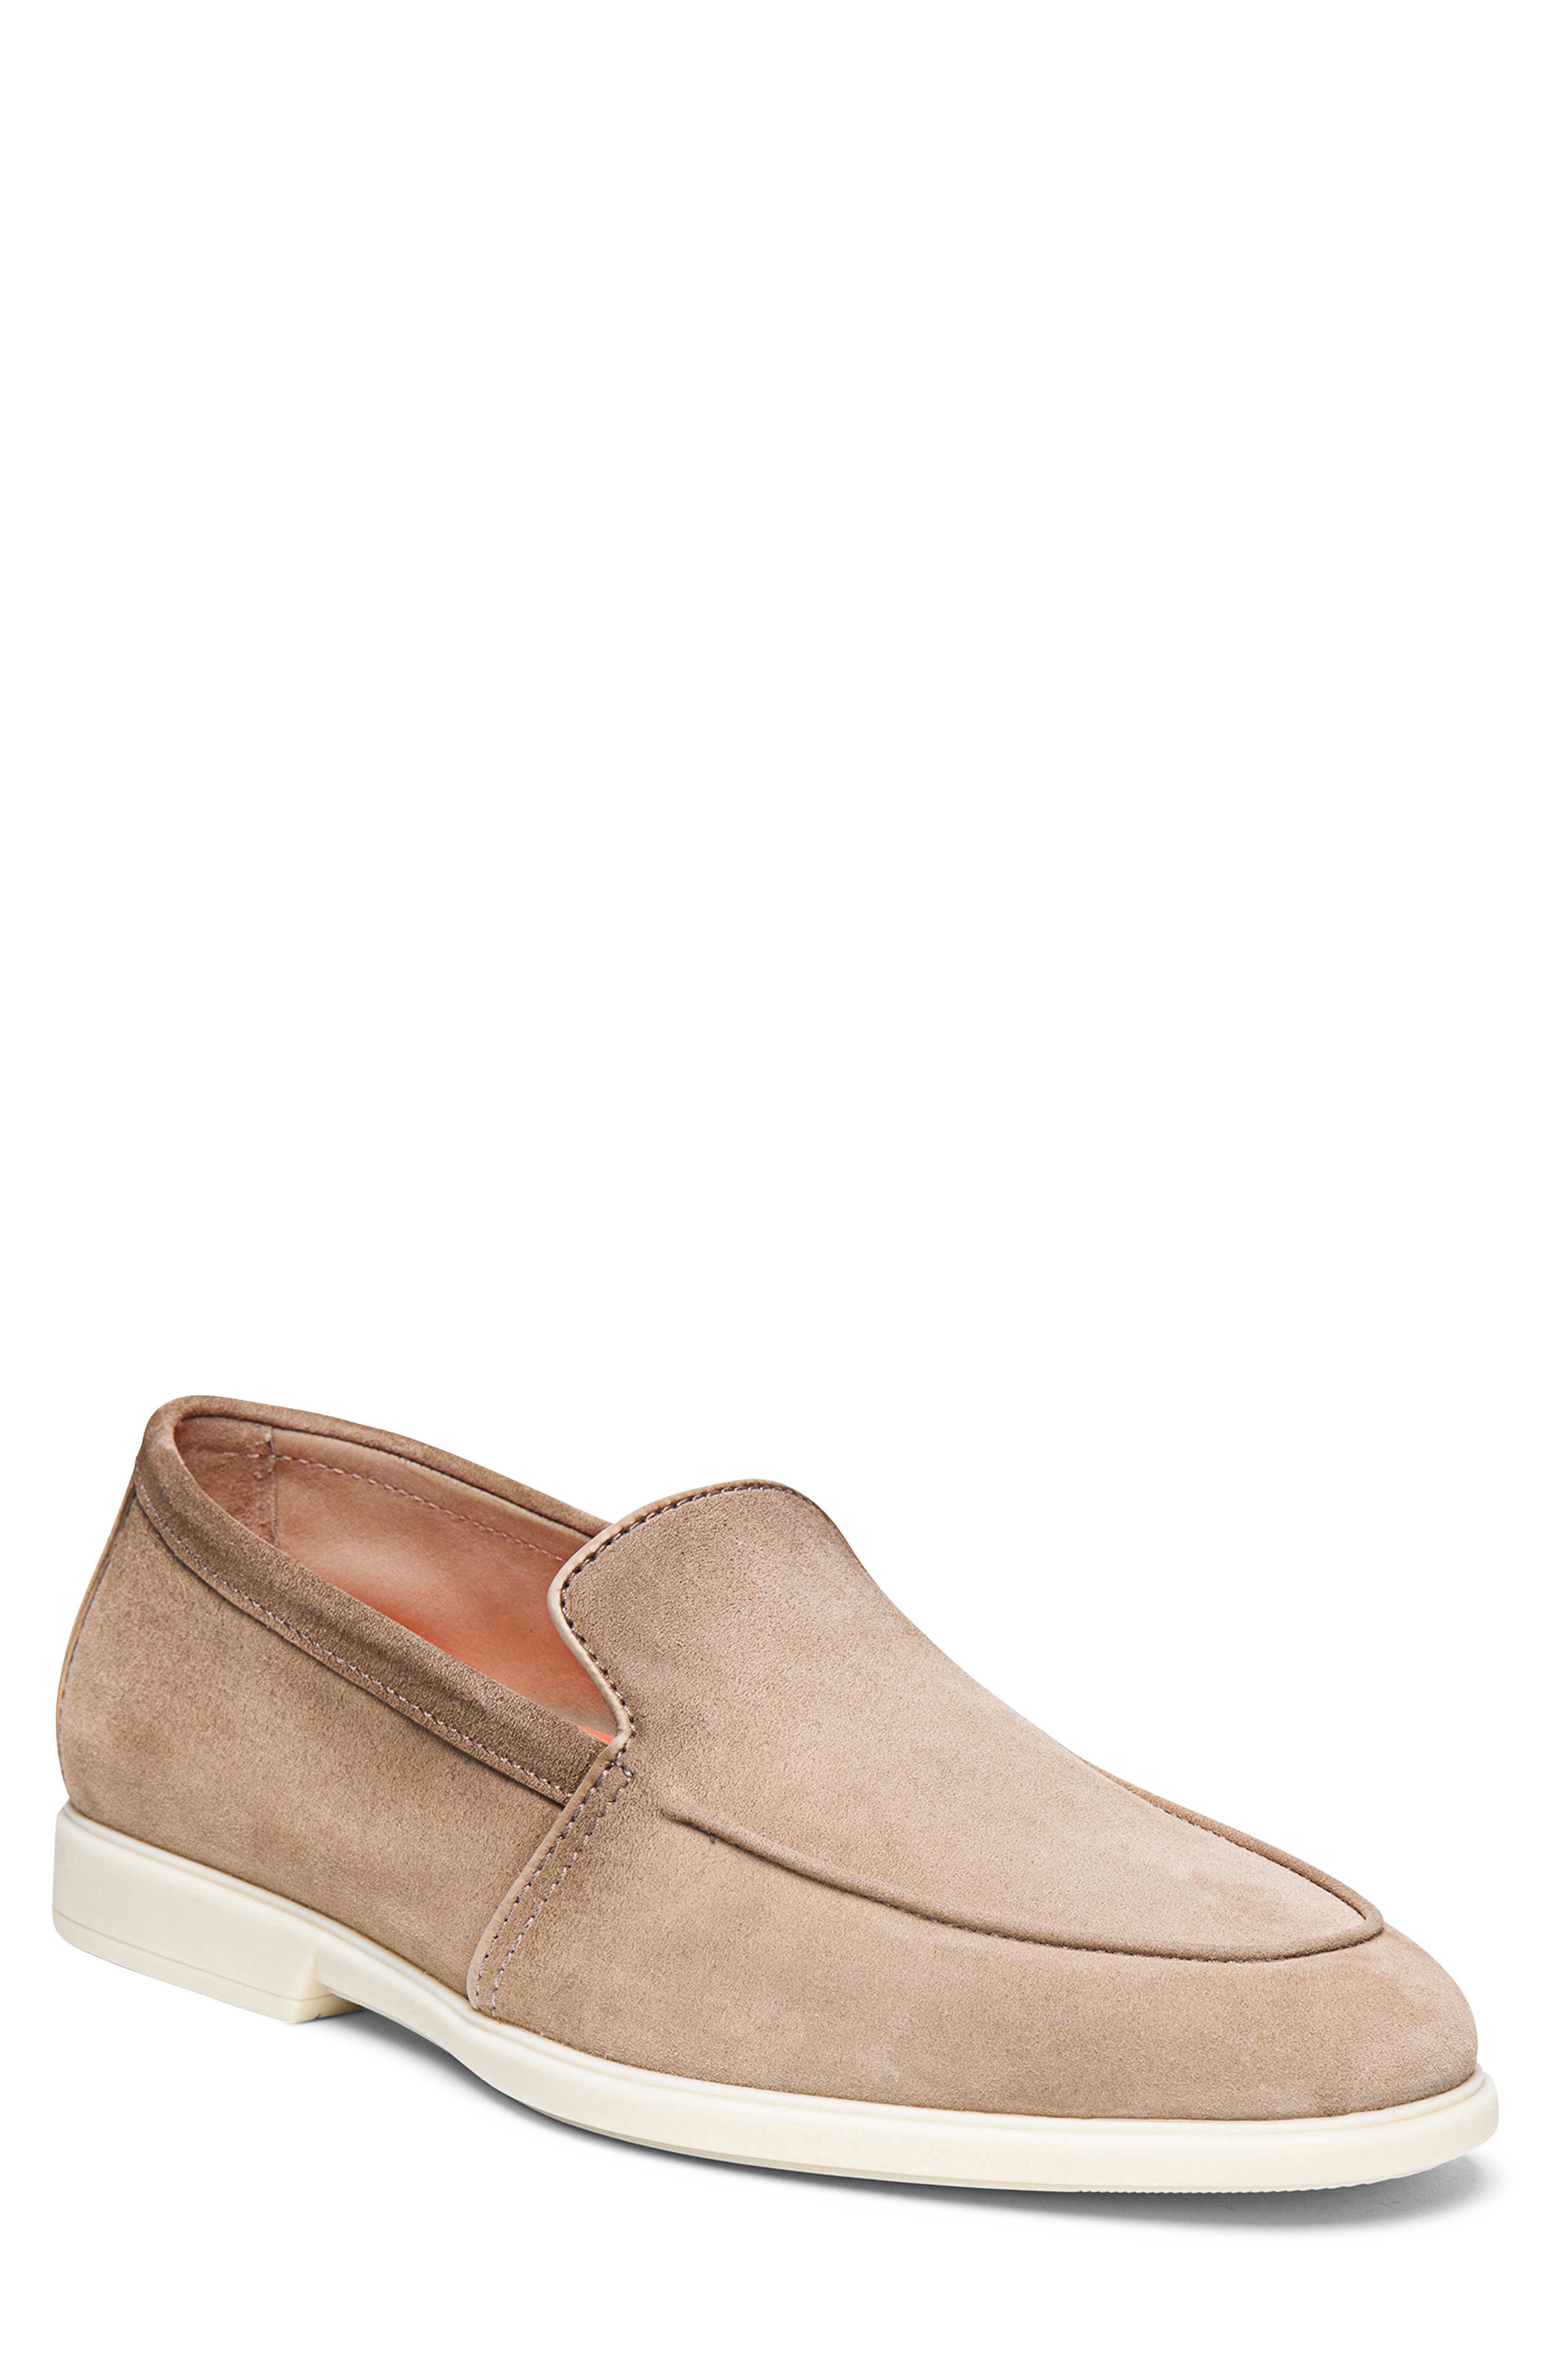 Santoni panelled calf-suede loafers - Neutrals